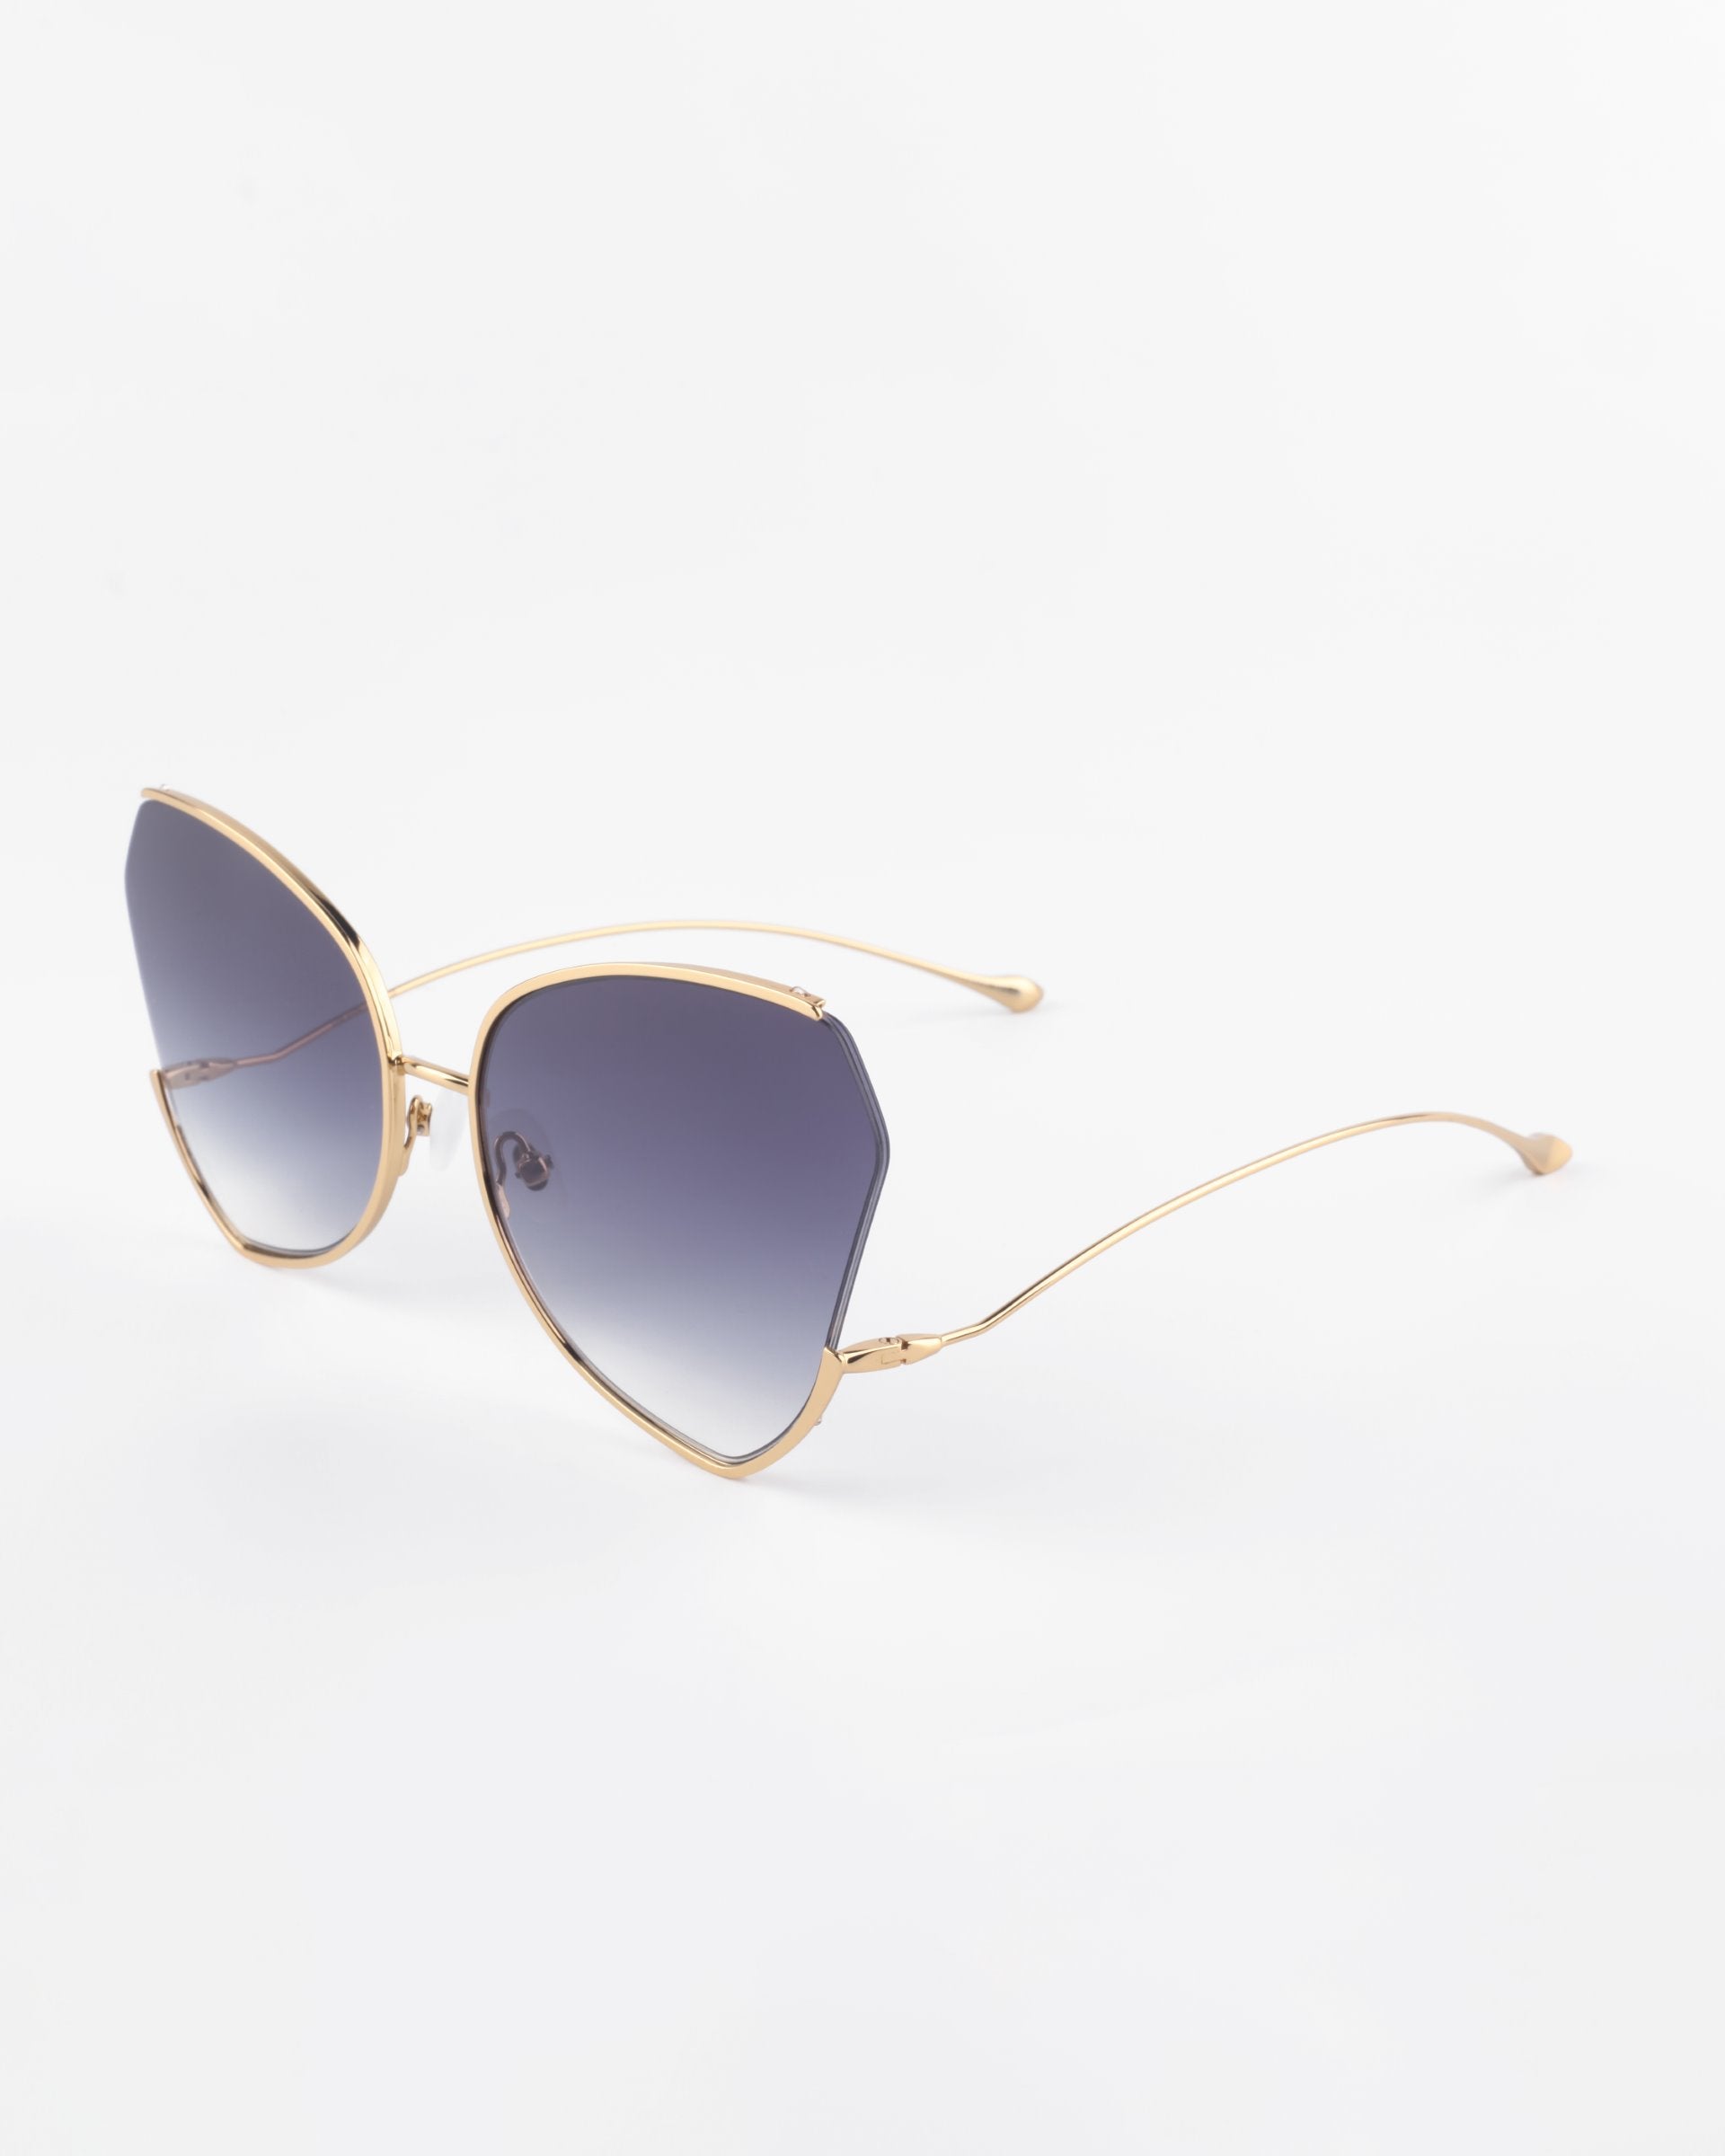 A pair of For Art's Sake® Watercolour sunglasses with gold-plated stainless steel frames and large, gradient gray ombré lenses. The design features a slight cat-eye shape, creating a fashionable and elegant look against a plain white background.